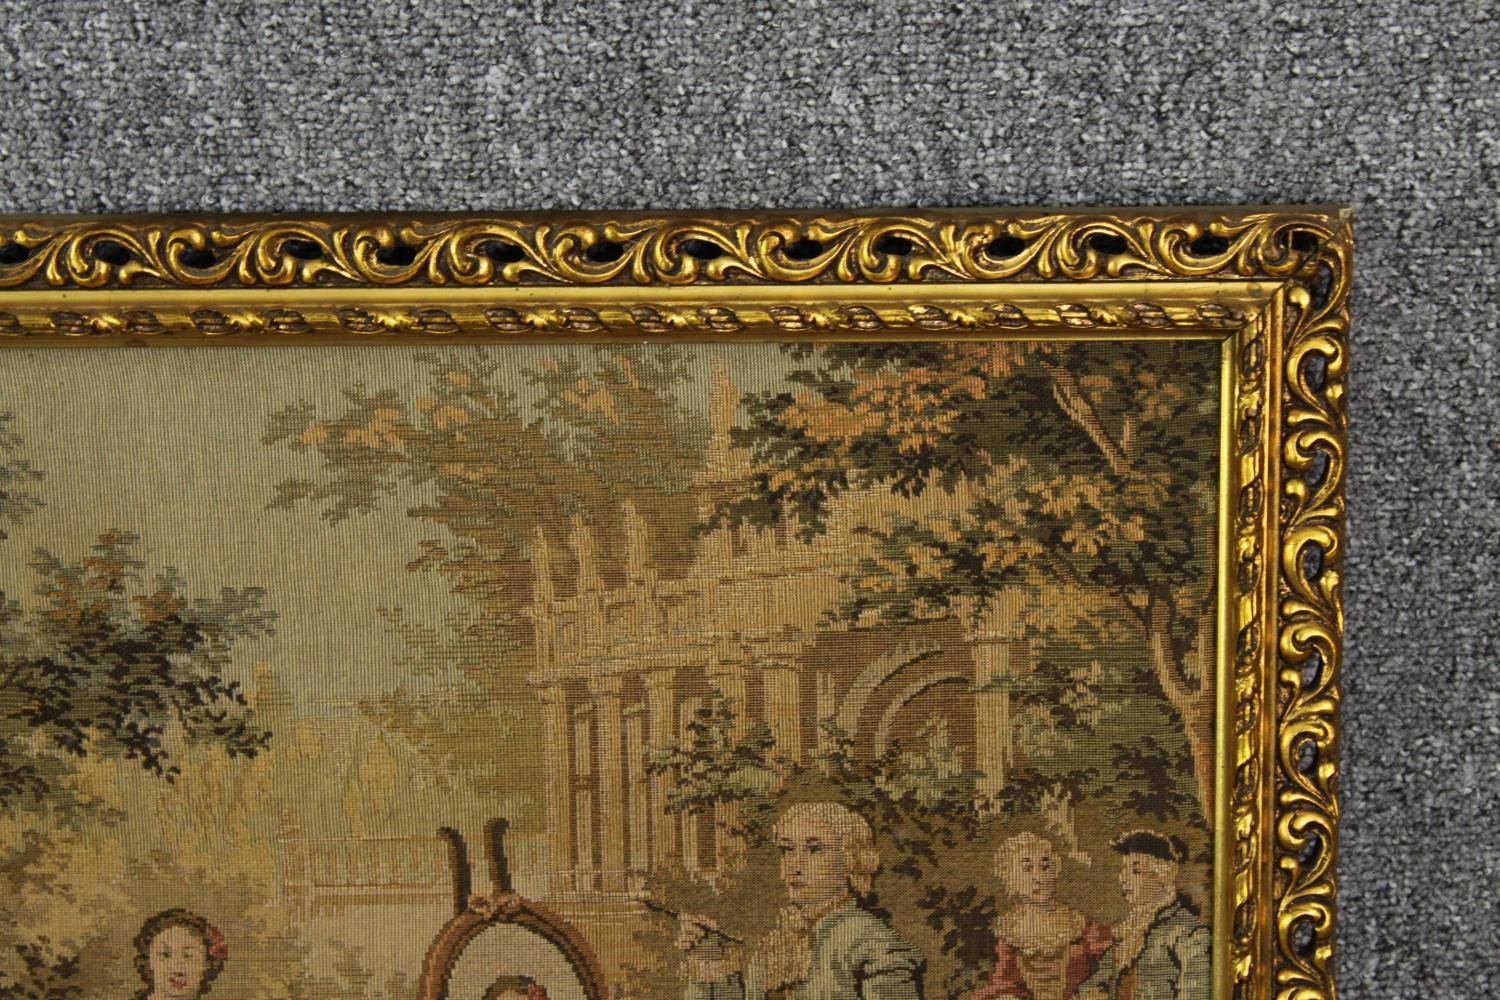 Aubusson style tapestry. In a decorative gilt frame. Early to mid twentieth century. H.53 x W.148 - Image 3 of 4